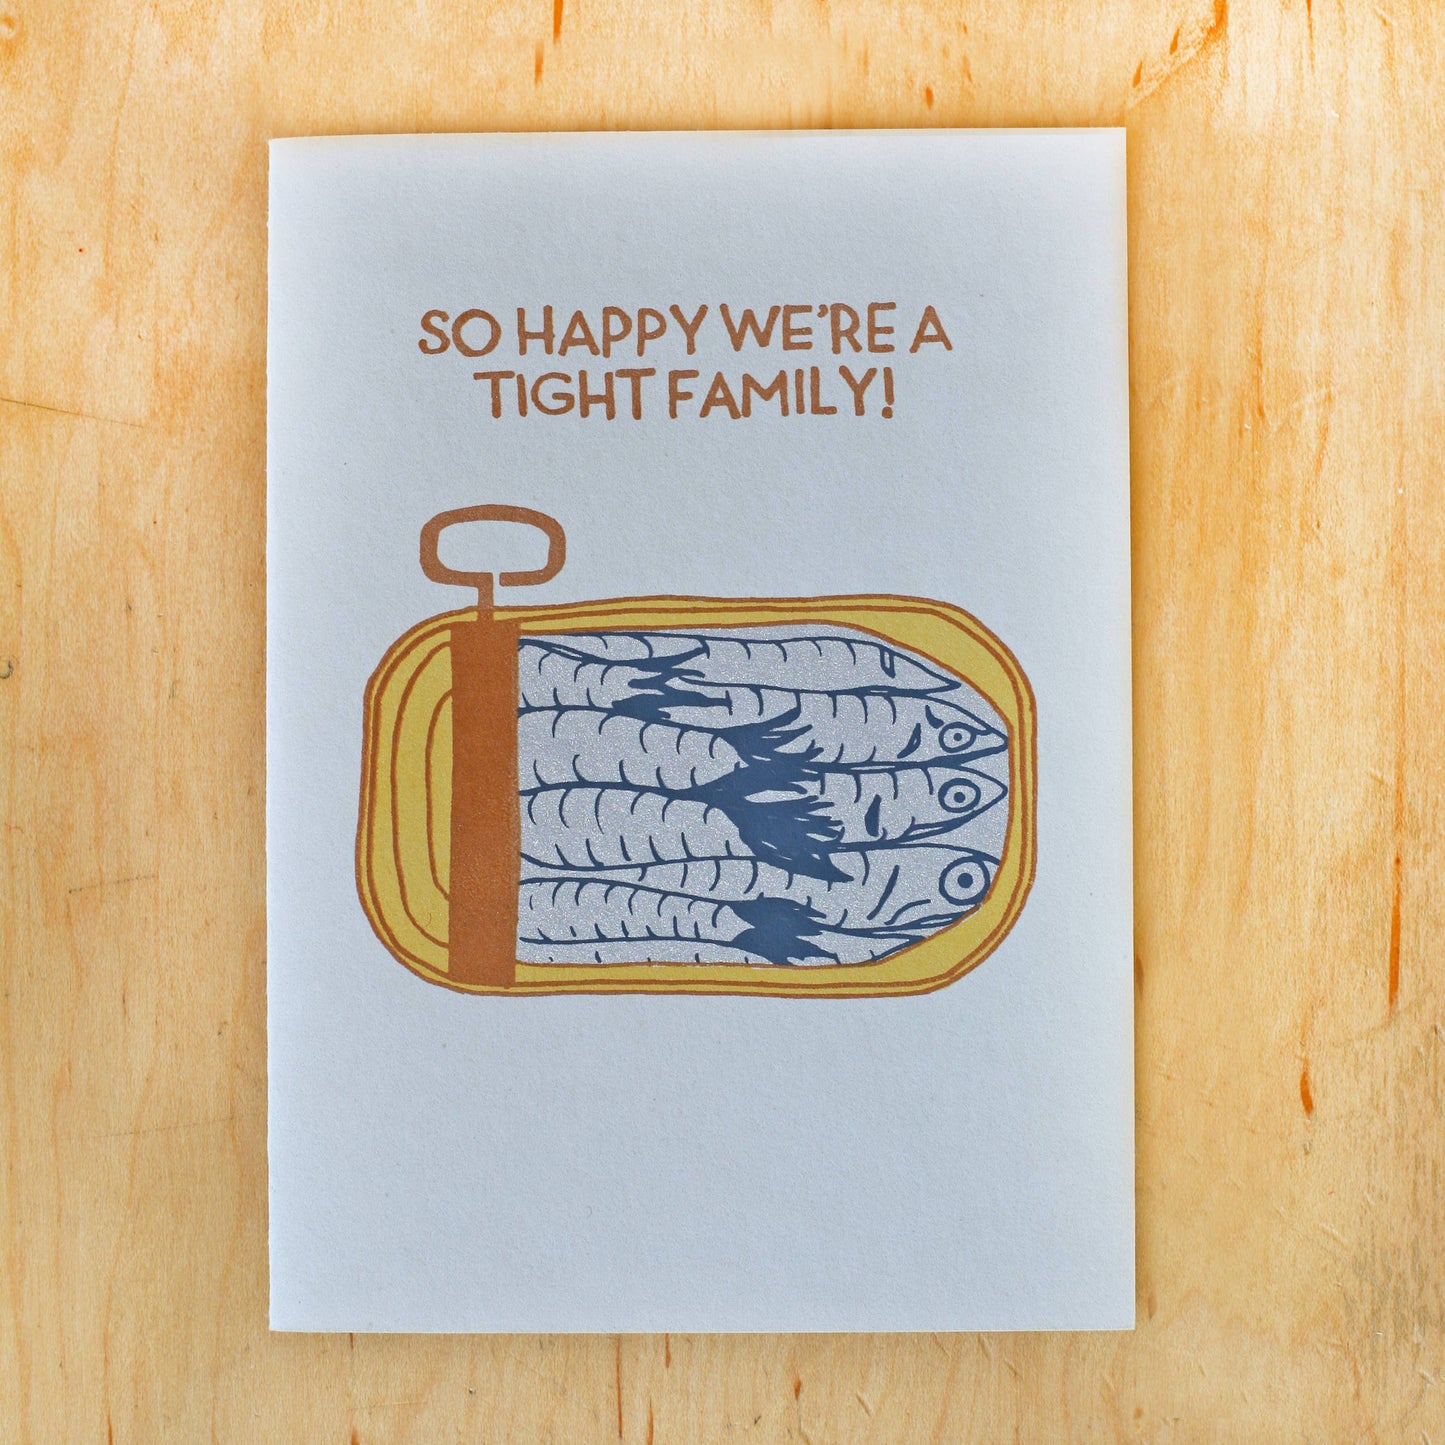 Greeting card with a tin of sardines on it that reads "So happy we're a tight family!" 